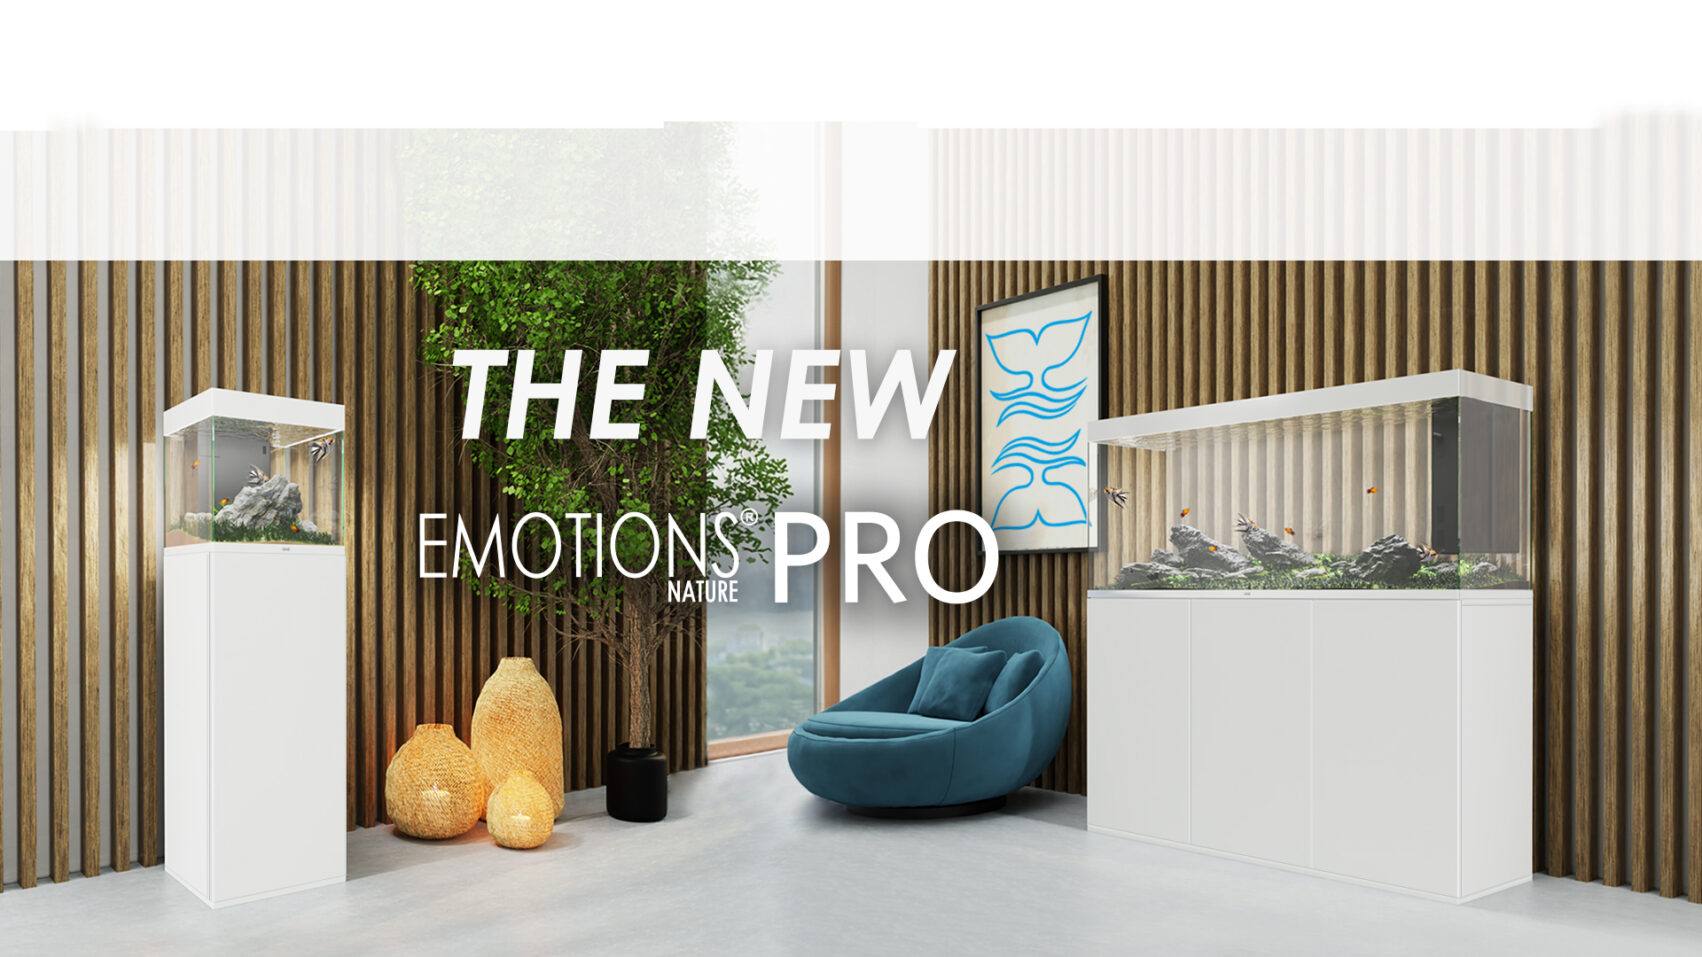 The new emotions pro